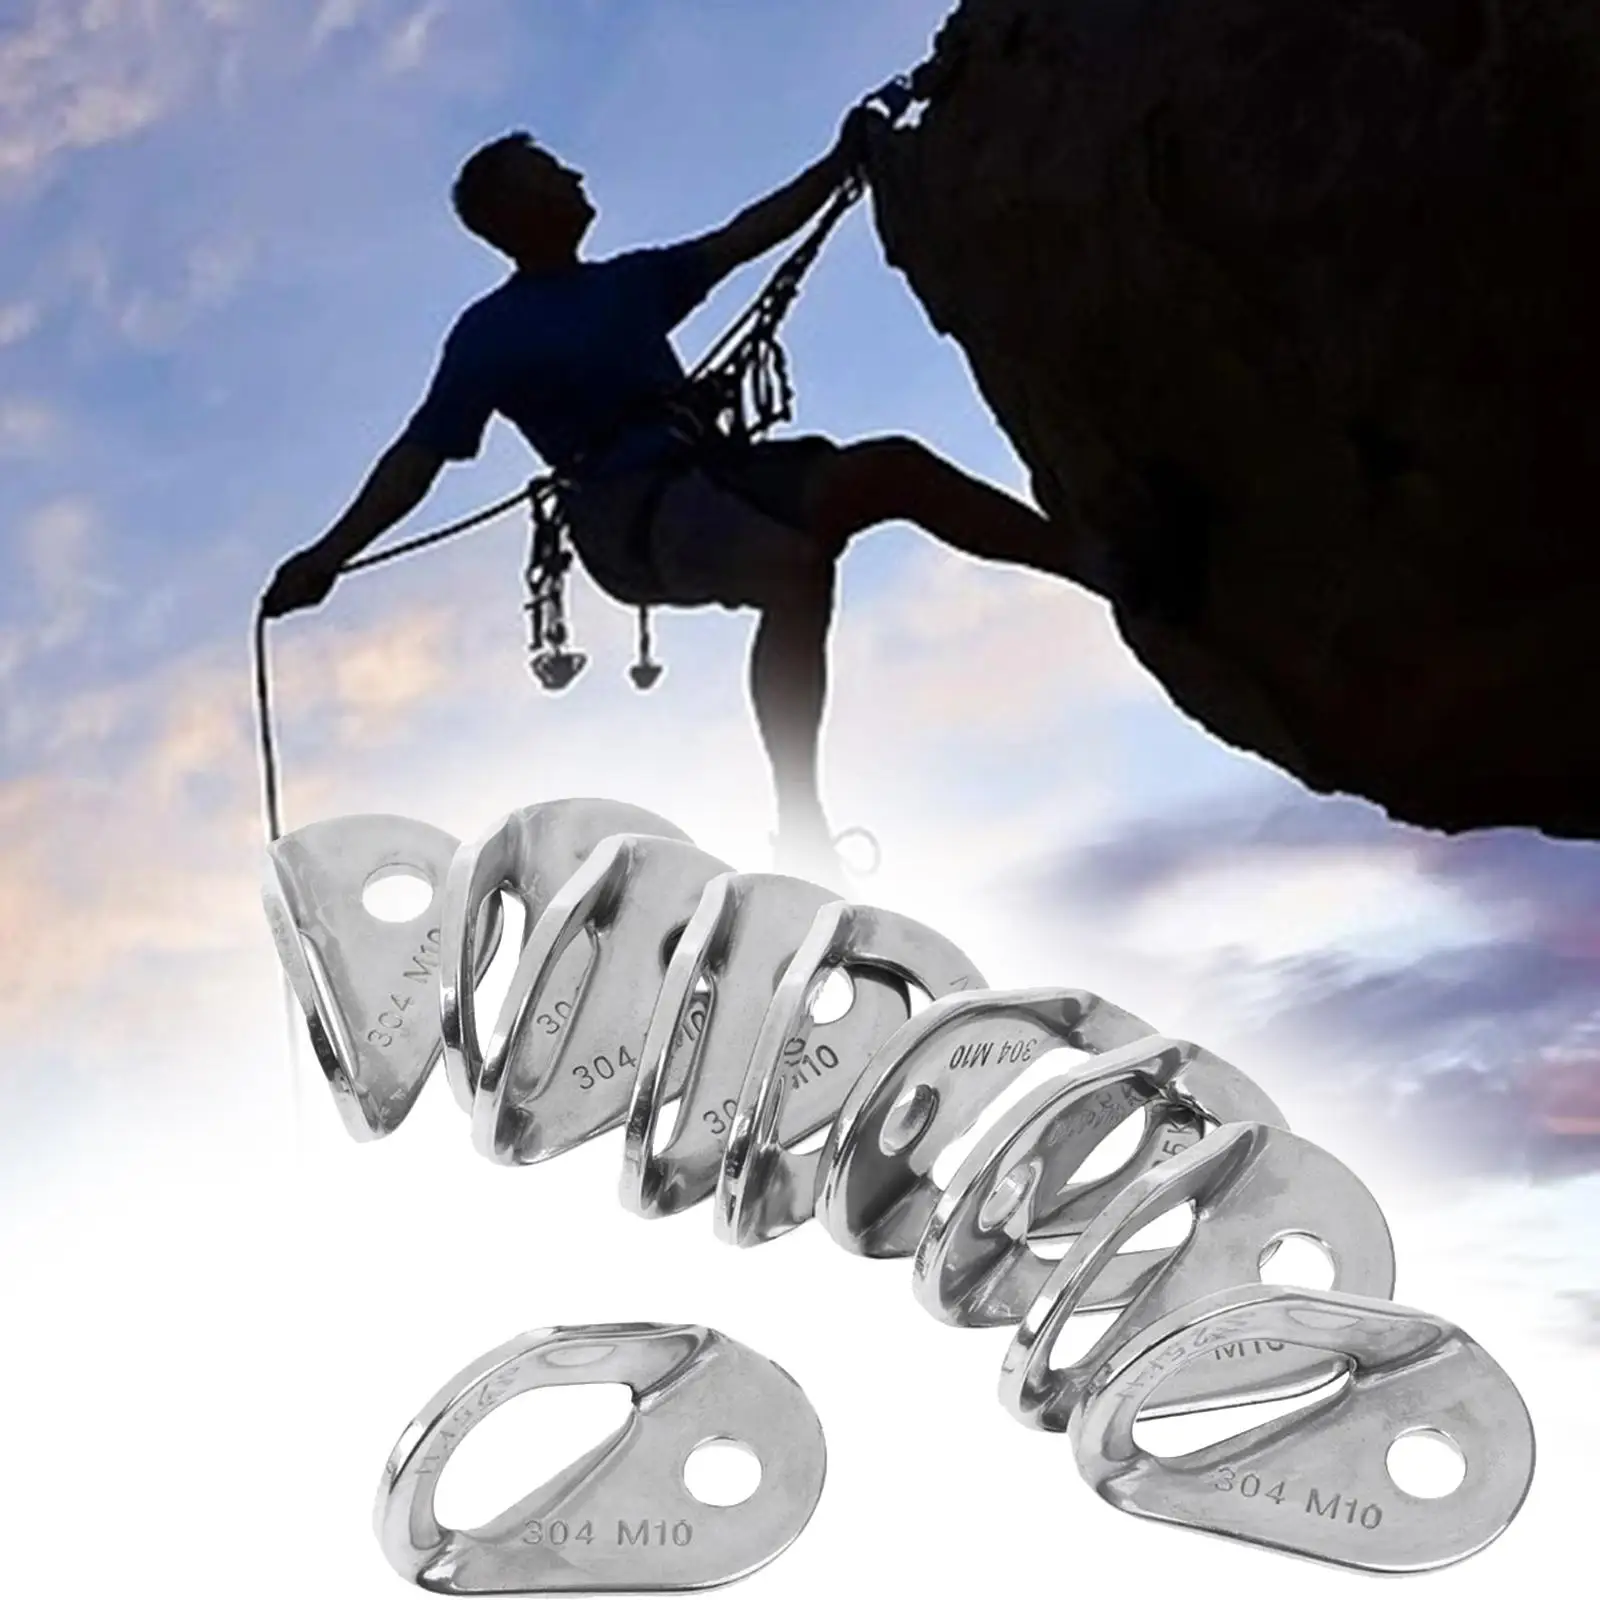 10x Climbing Anchor Bolt Hanger Anchor Protection 10mm Heavy Duty Expansion Nail Bolt Hanger for Travel Outdoor Rappelling Piton